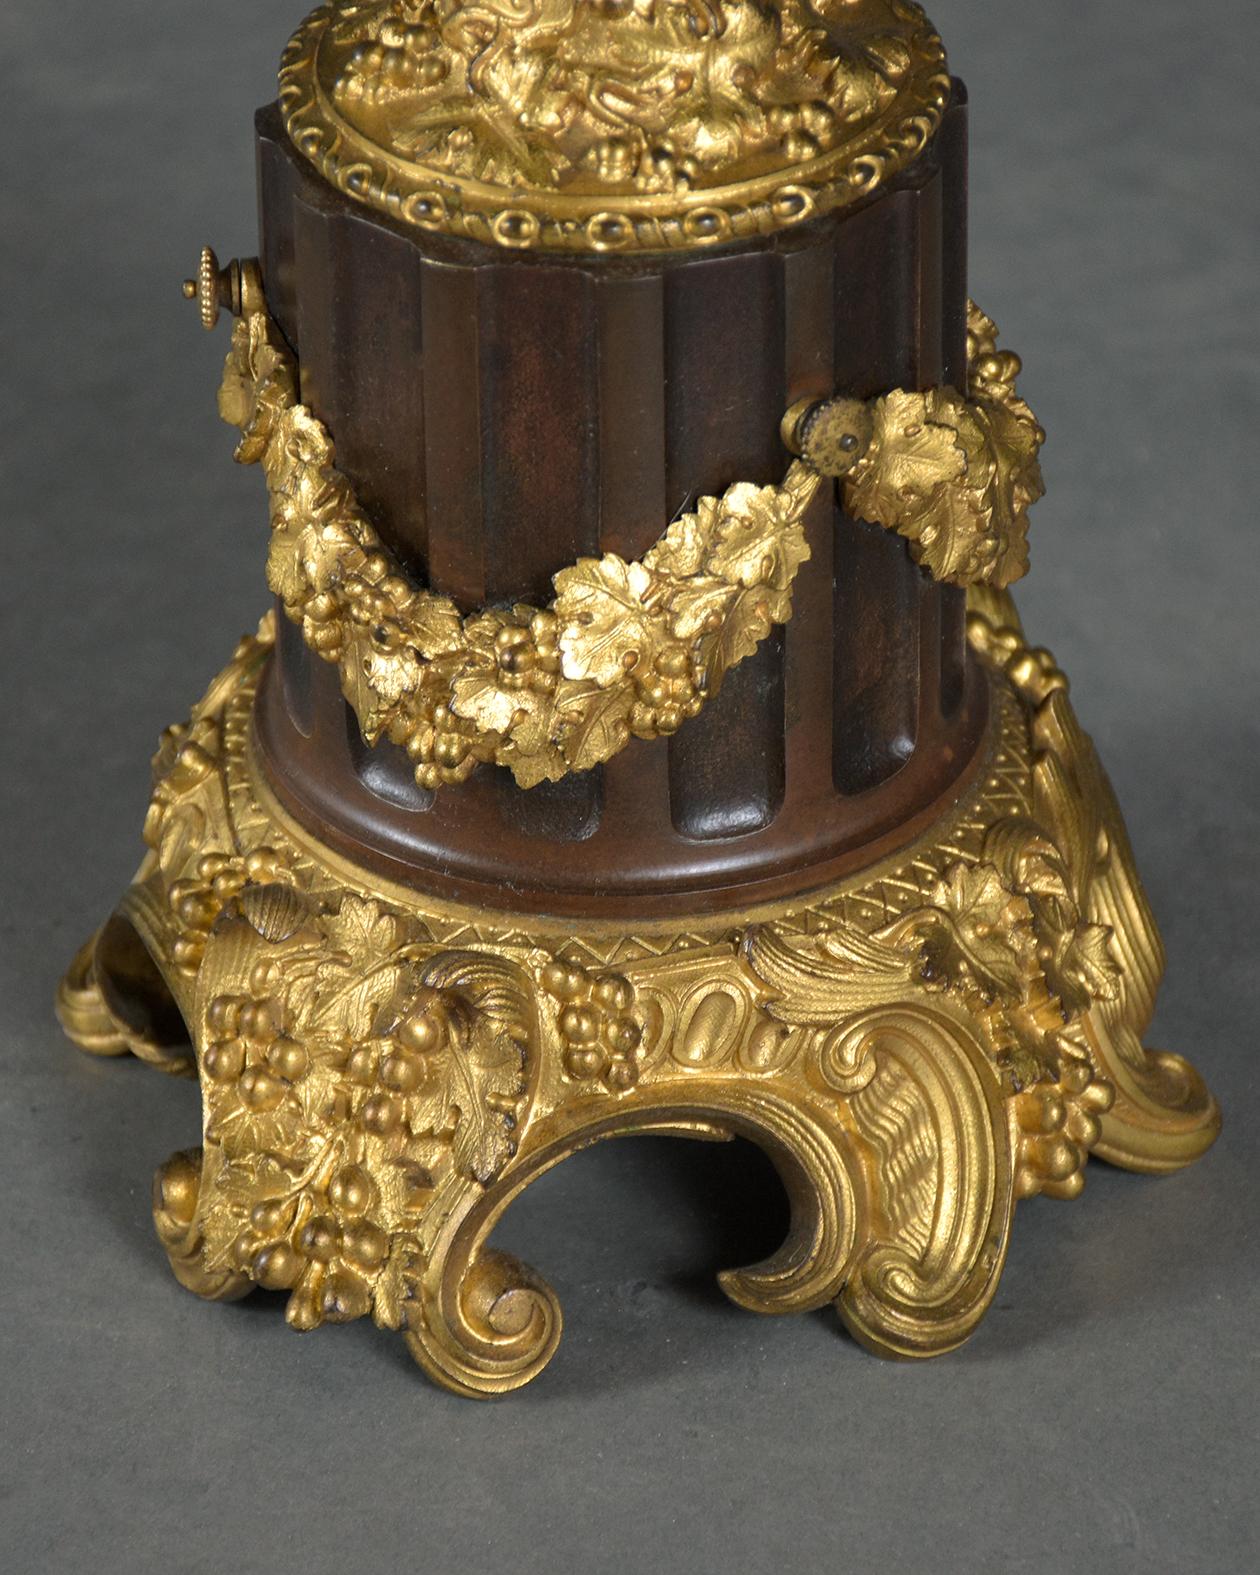 Elegant 19th-Century French Bronzed Urns with Gold Ormolu Details For Sale 1